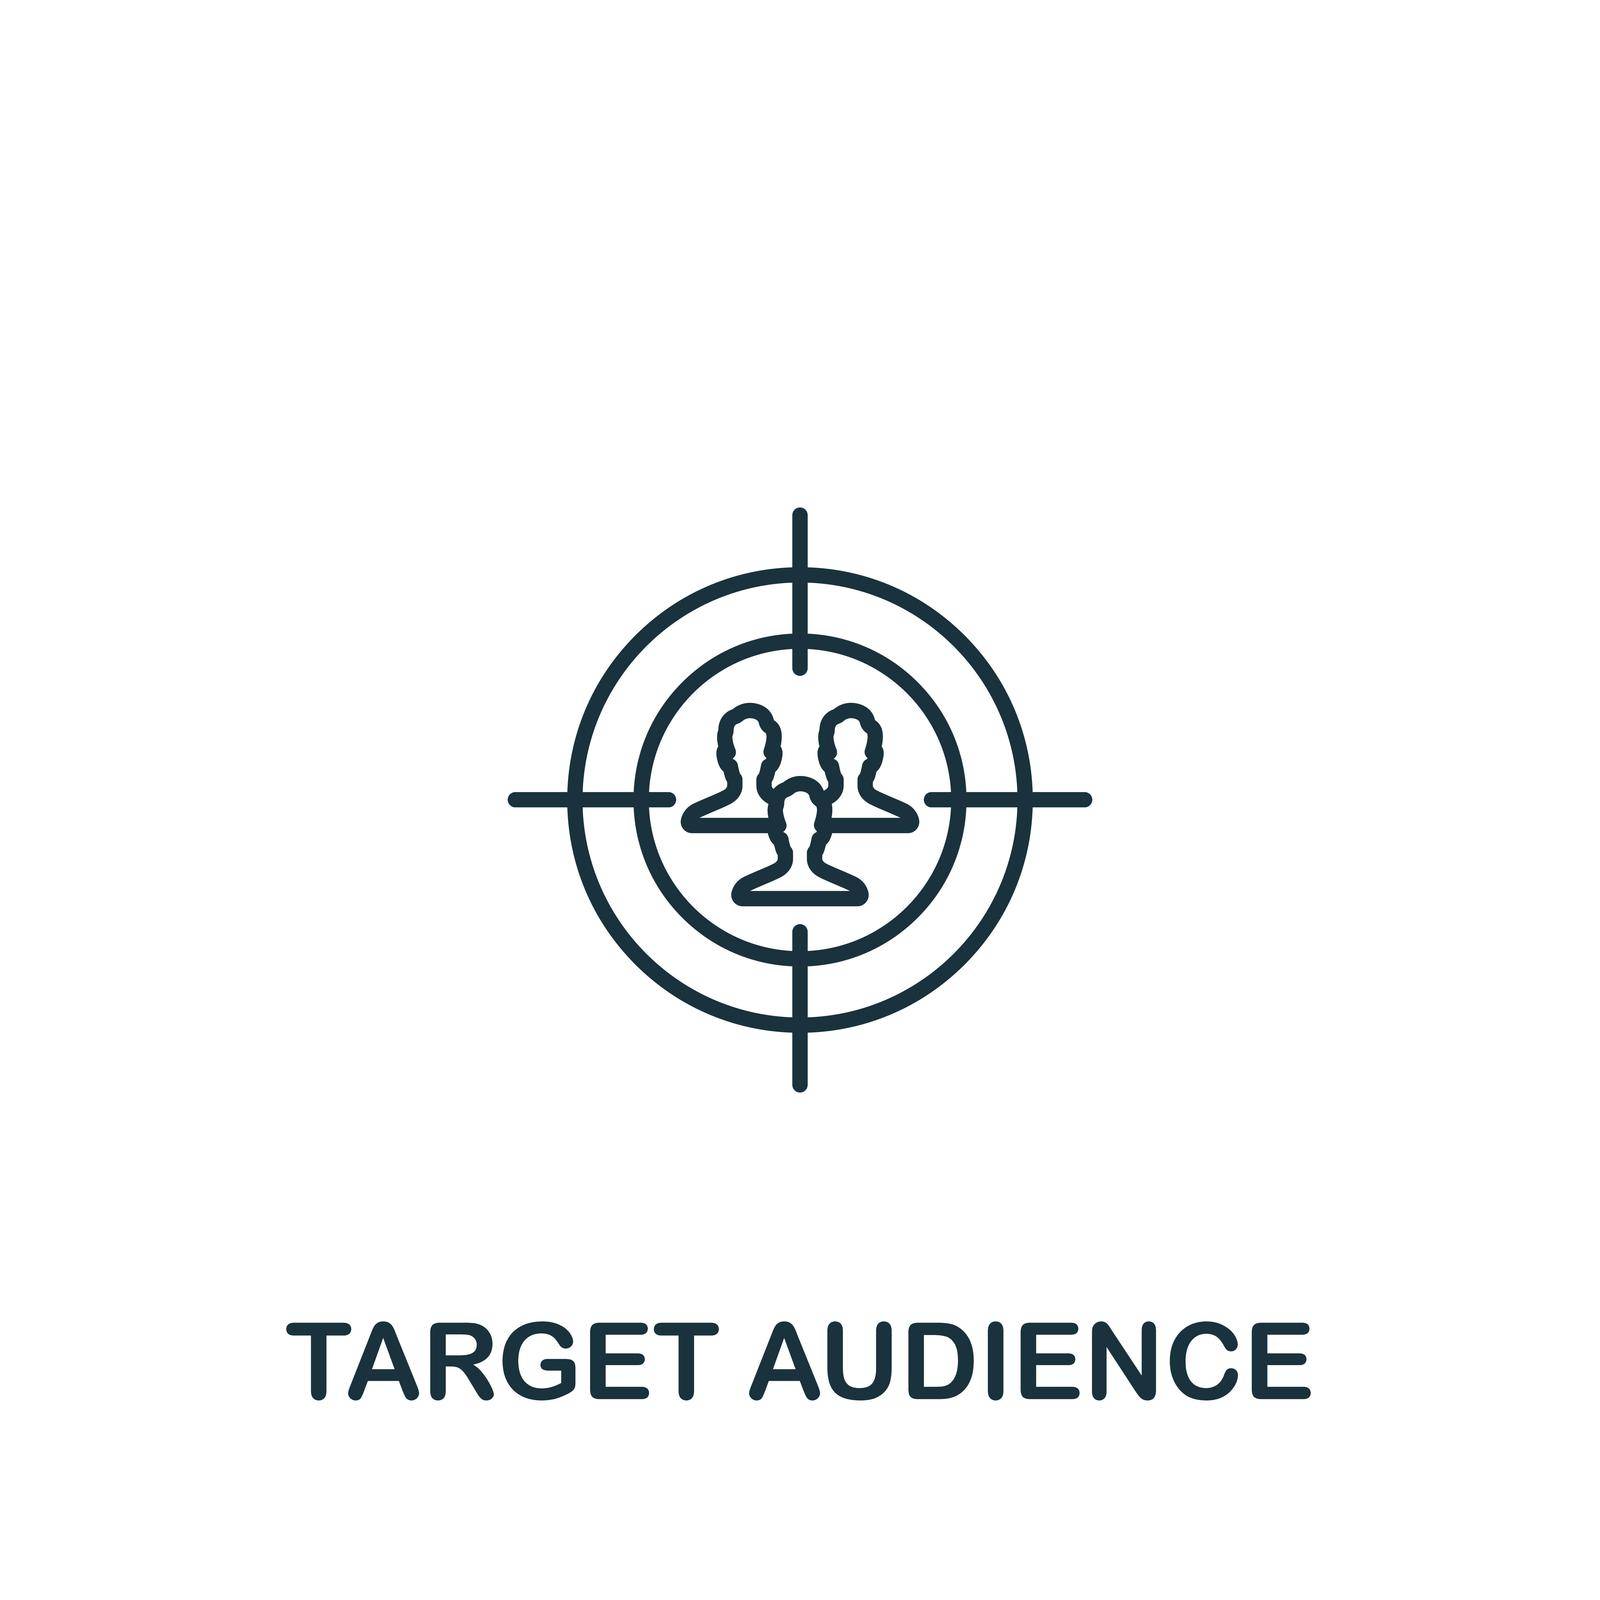 Target Audience icon. Monochrome simple Community icon for templates, web design and infographics by simakovavector